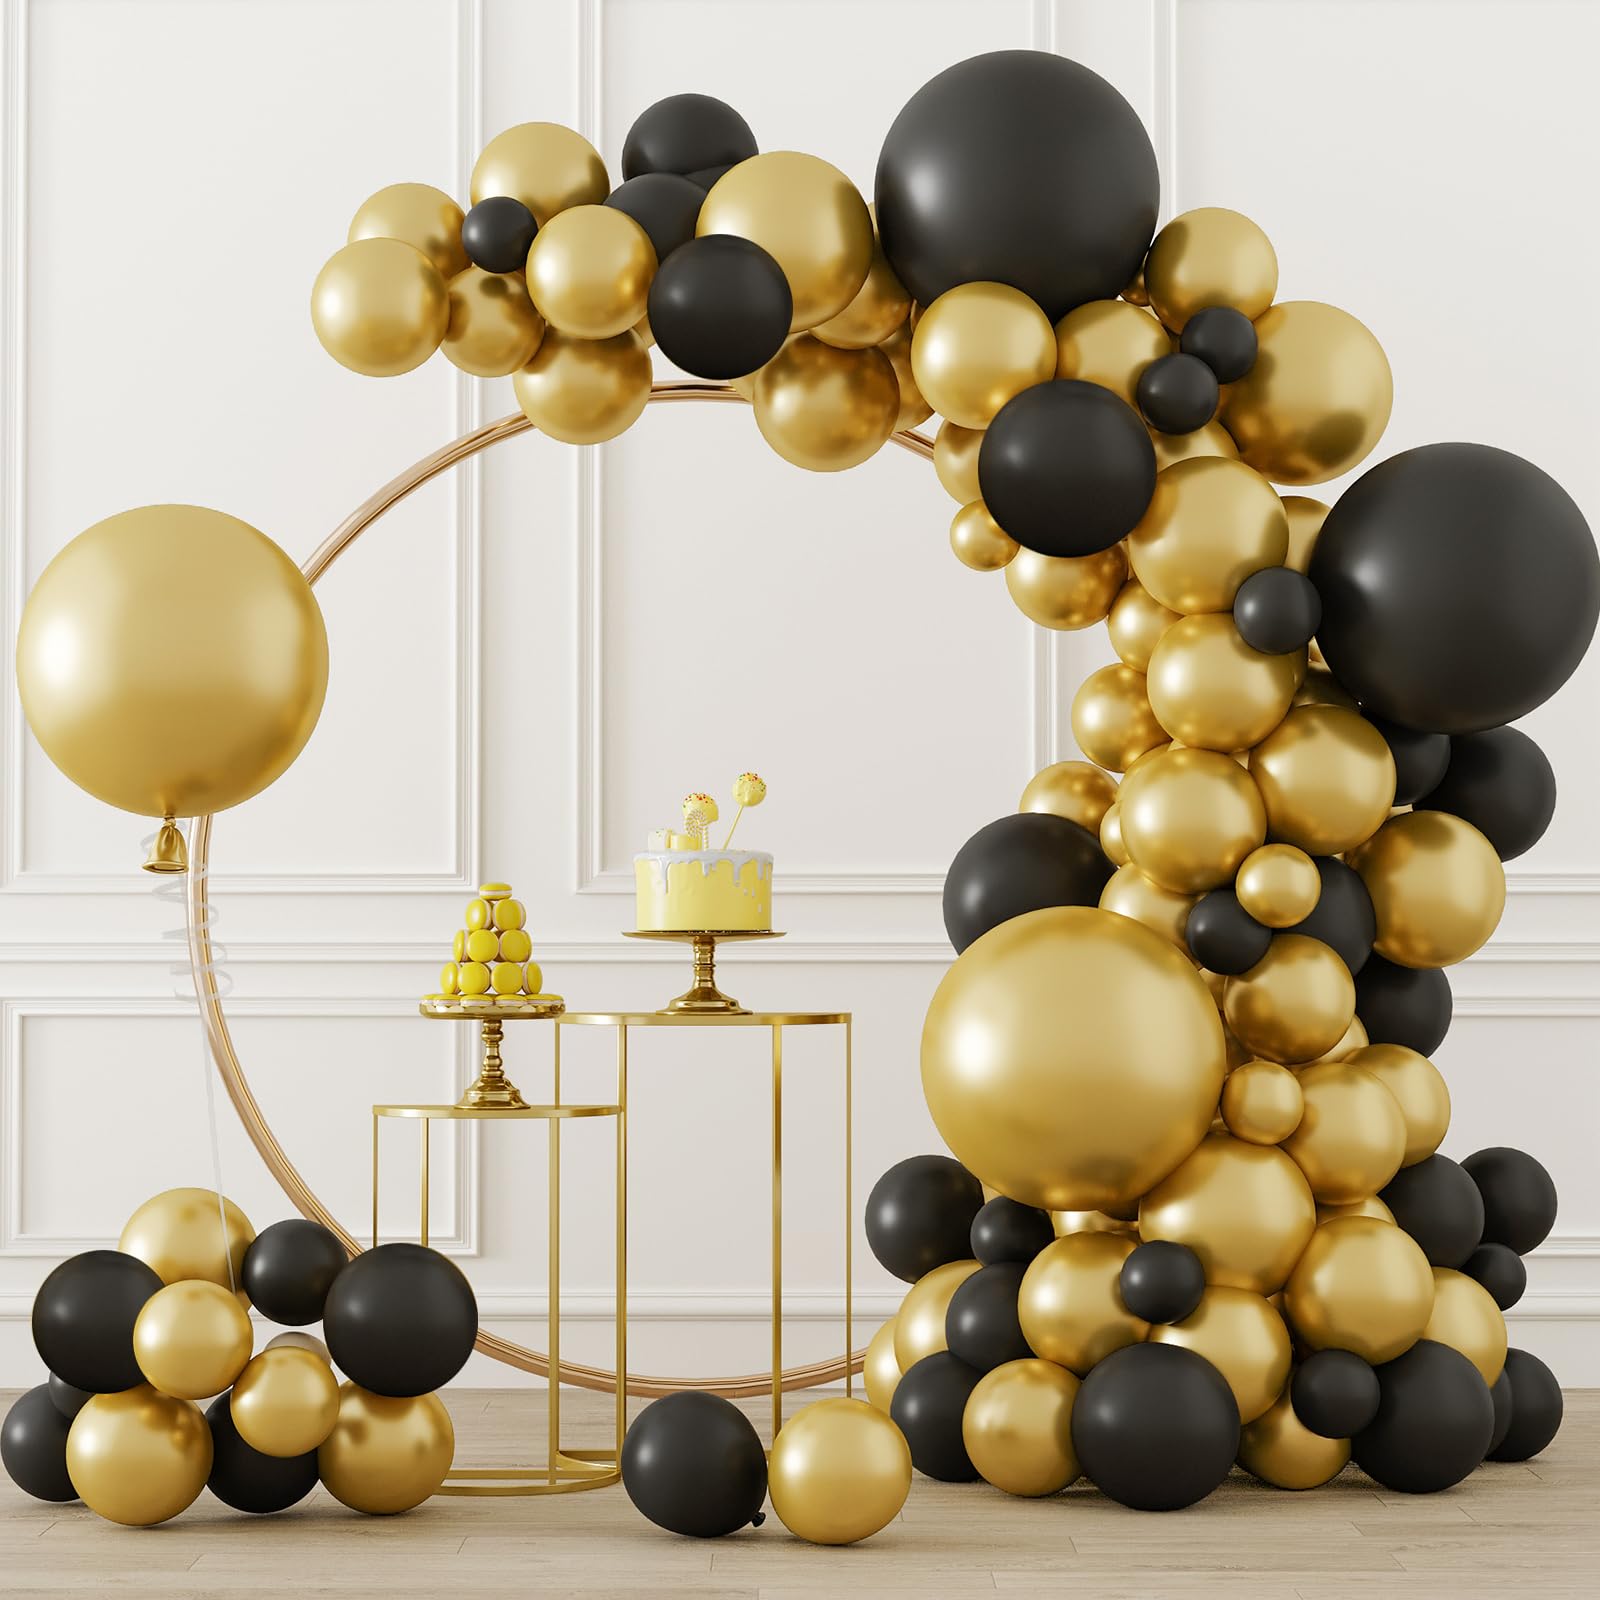 RUBFAC 92pcs Metallic Gold Balloons and 105pcs Dark Green Balloons Different Sizes 5/10/12/18 Inch Balloon Garland Kit for Birthday Party Wedding Holiday Decorations